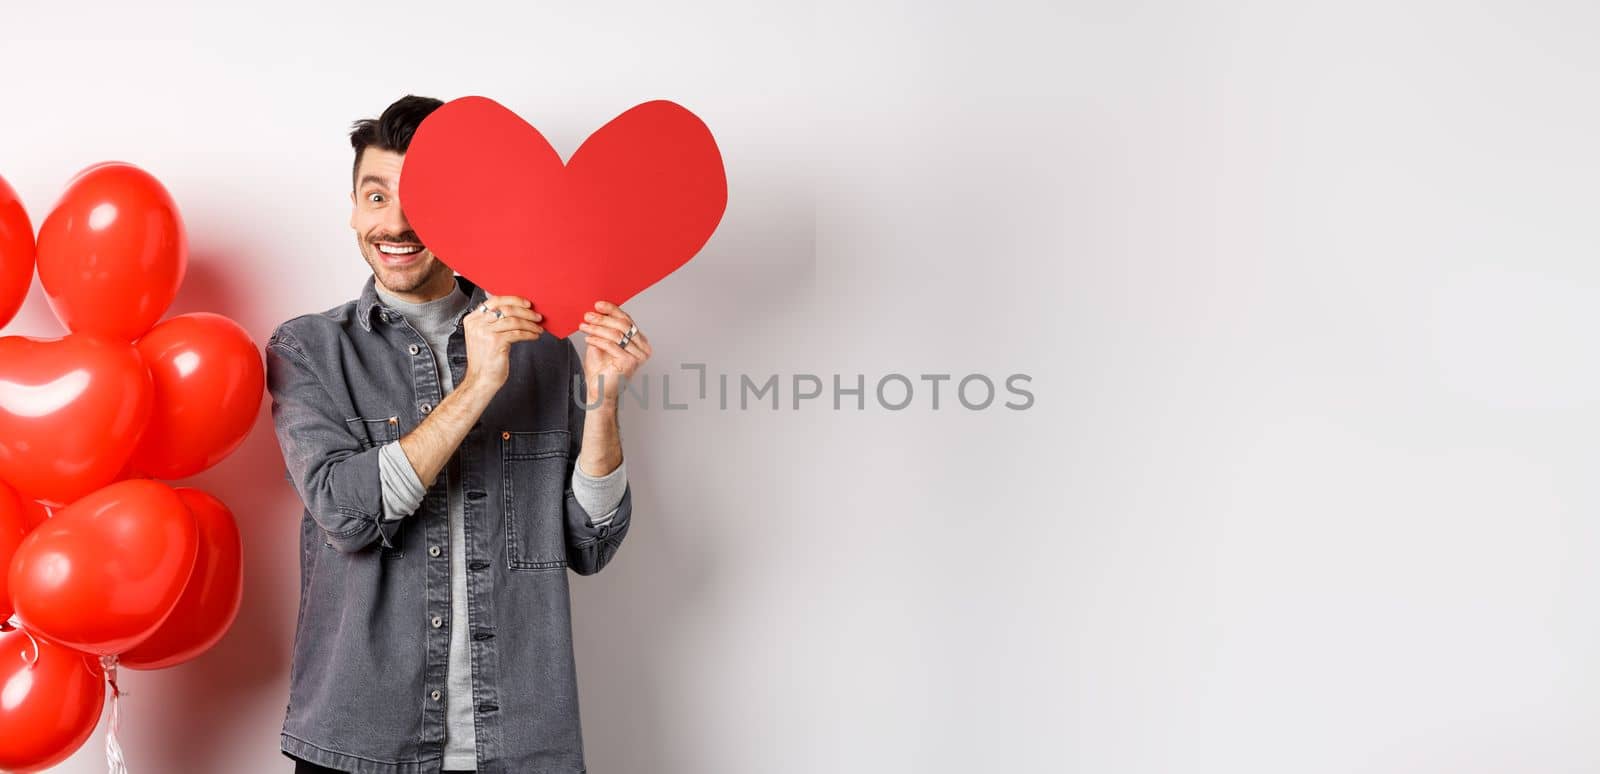 Romantic smiling man cover face with Valentine heart card and looking happy at camera, celebrating lovers day with partner, standing on white background.